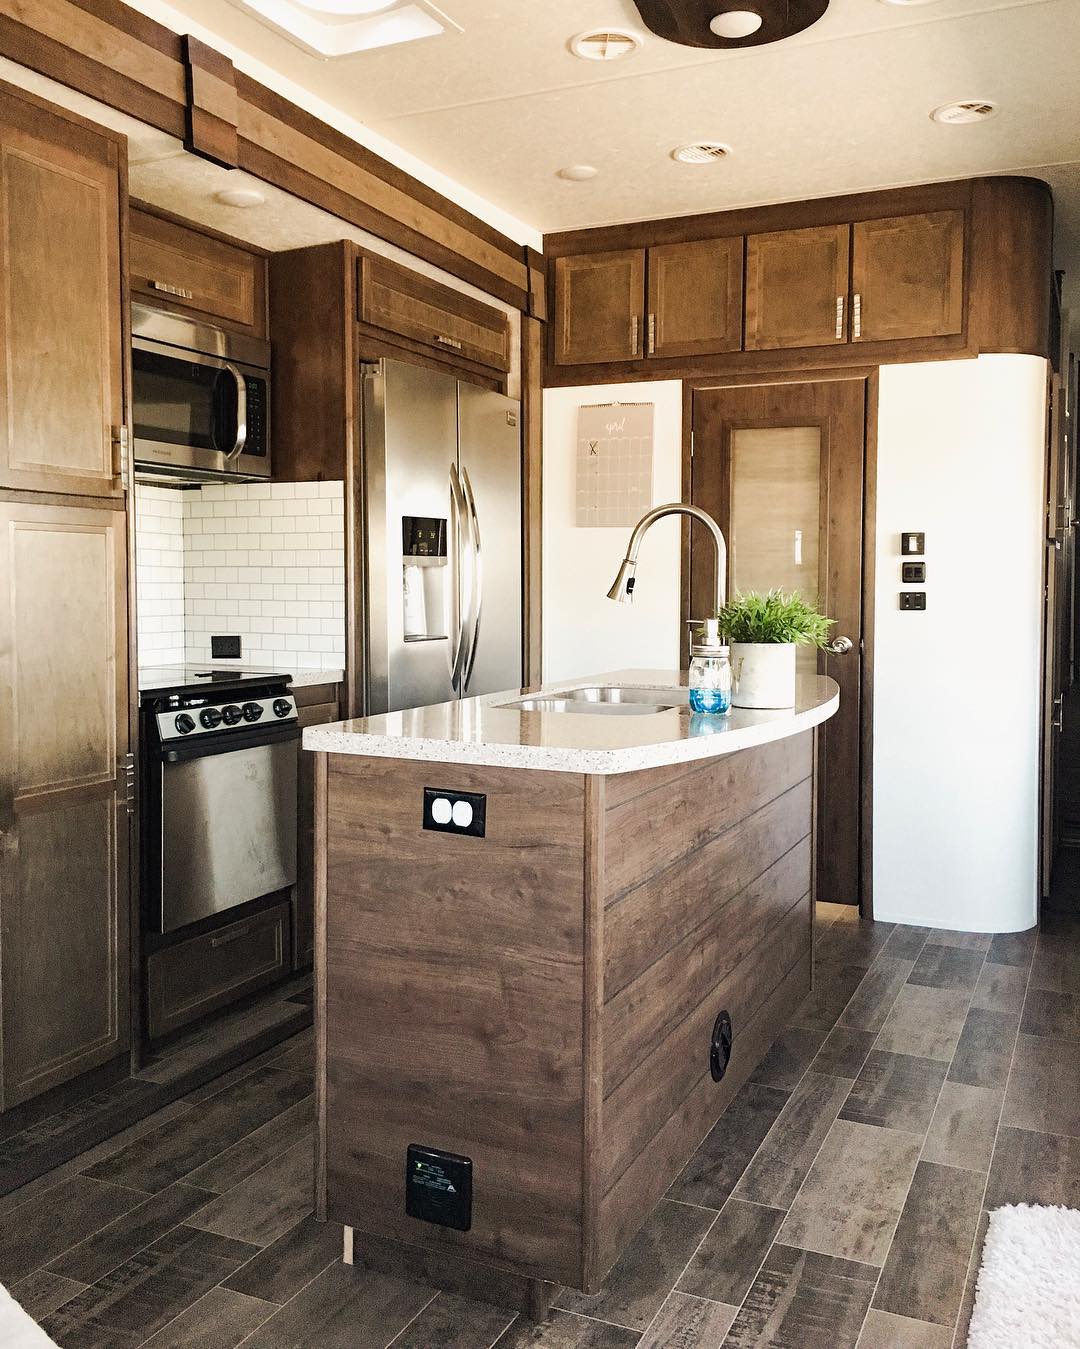 Kitchenette view in rustic RV. Photo by Instagram user @thetinywallsfamily.